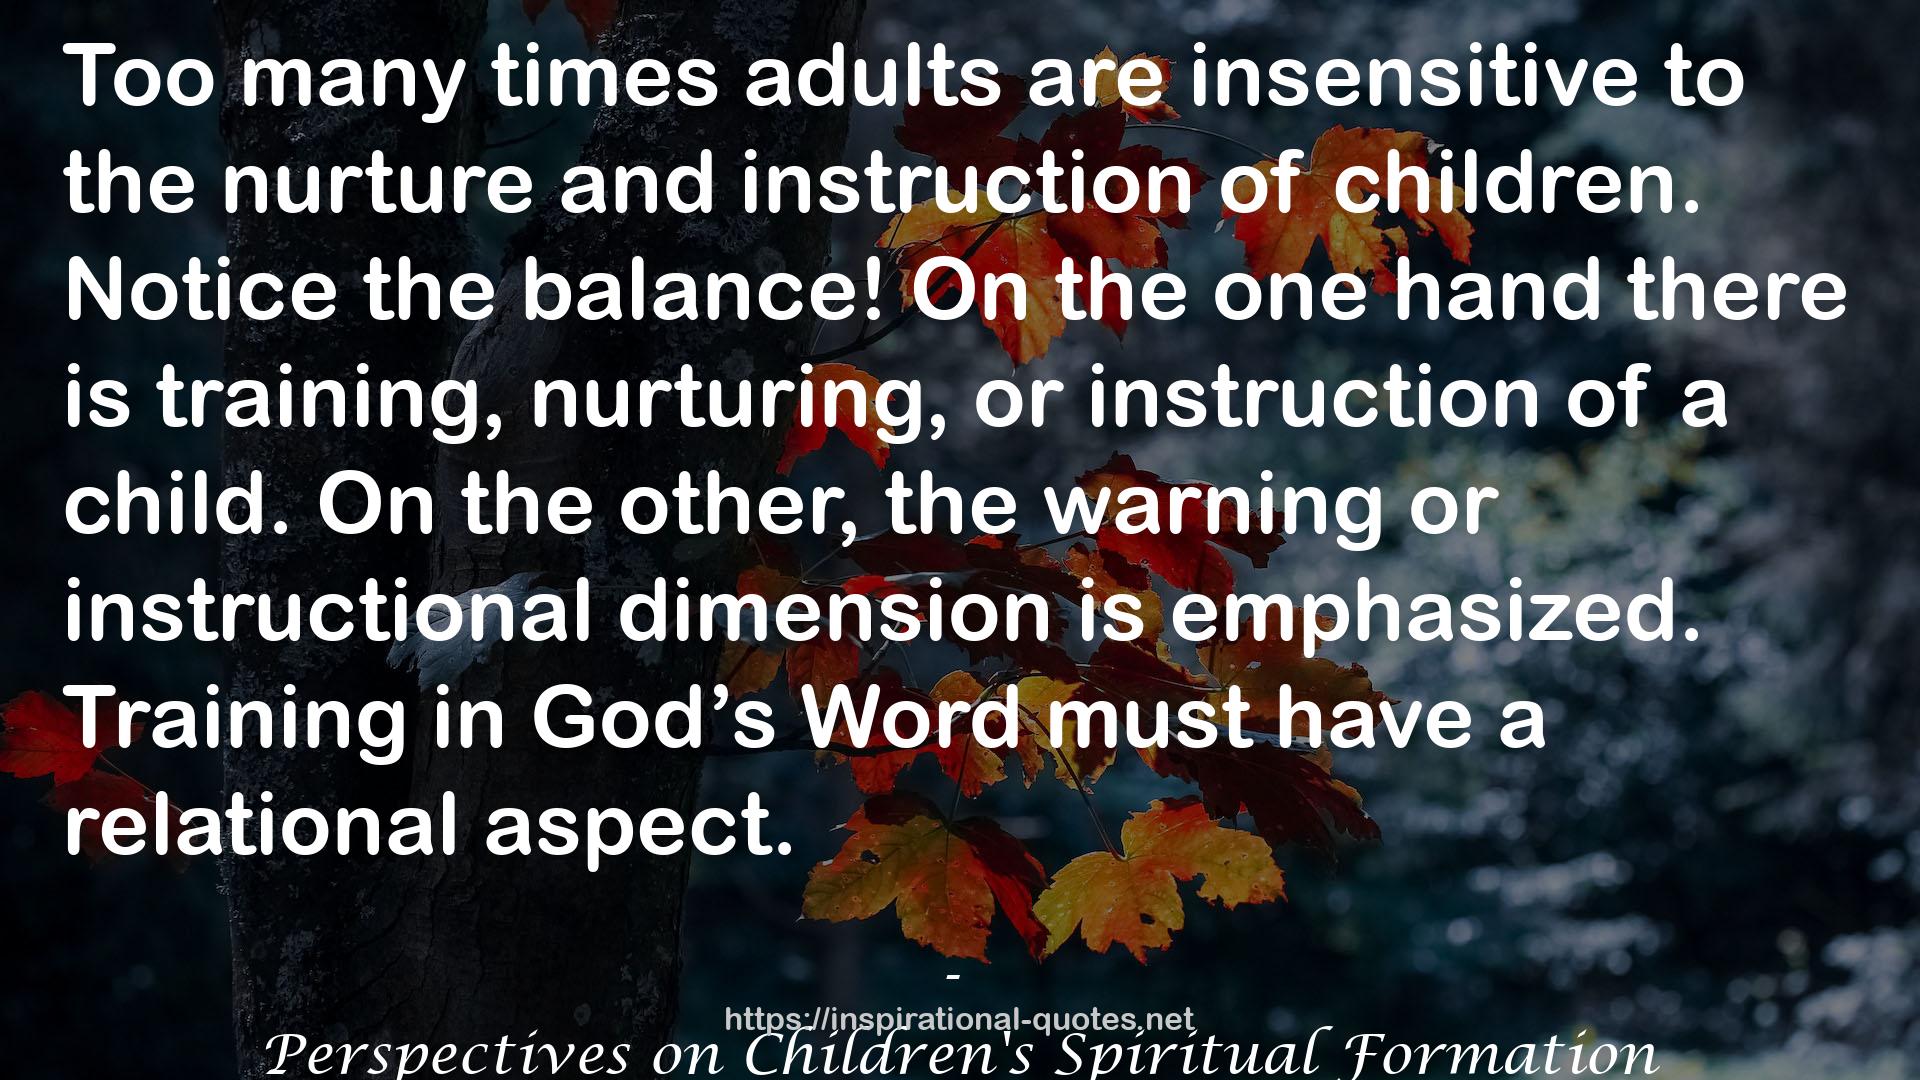 Perspectives on Children's Spiritual Formation QUOTES